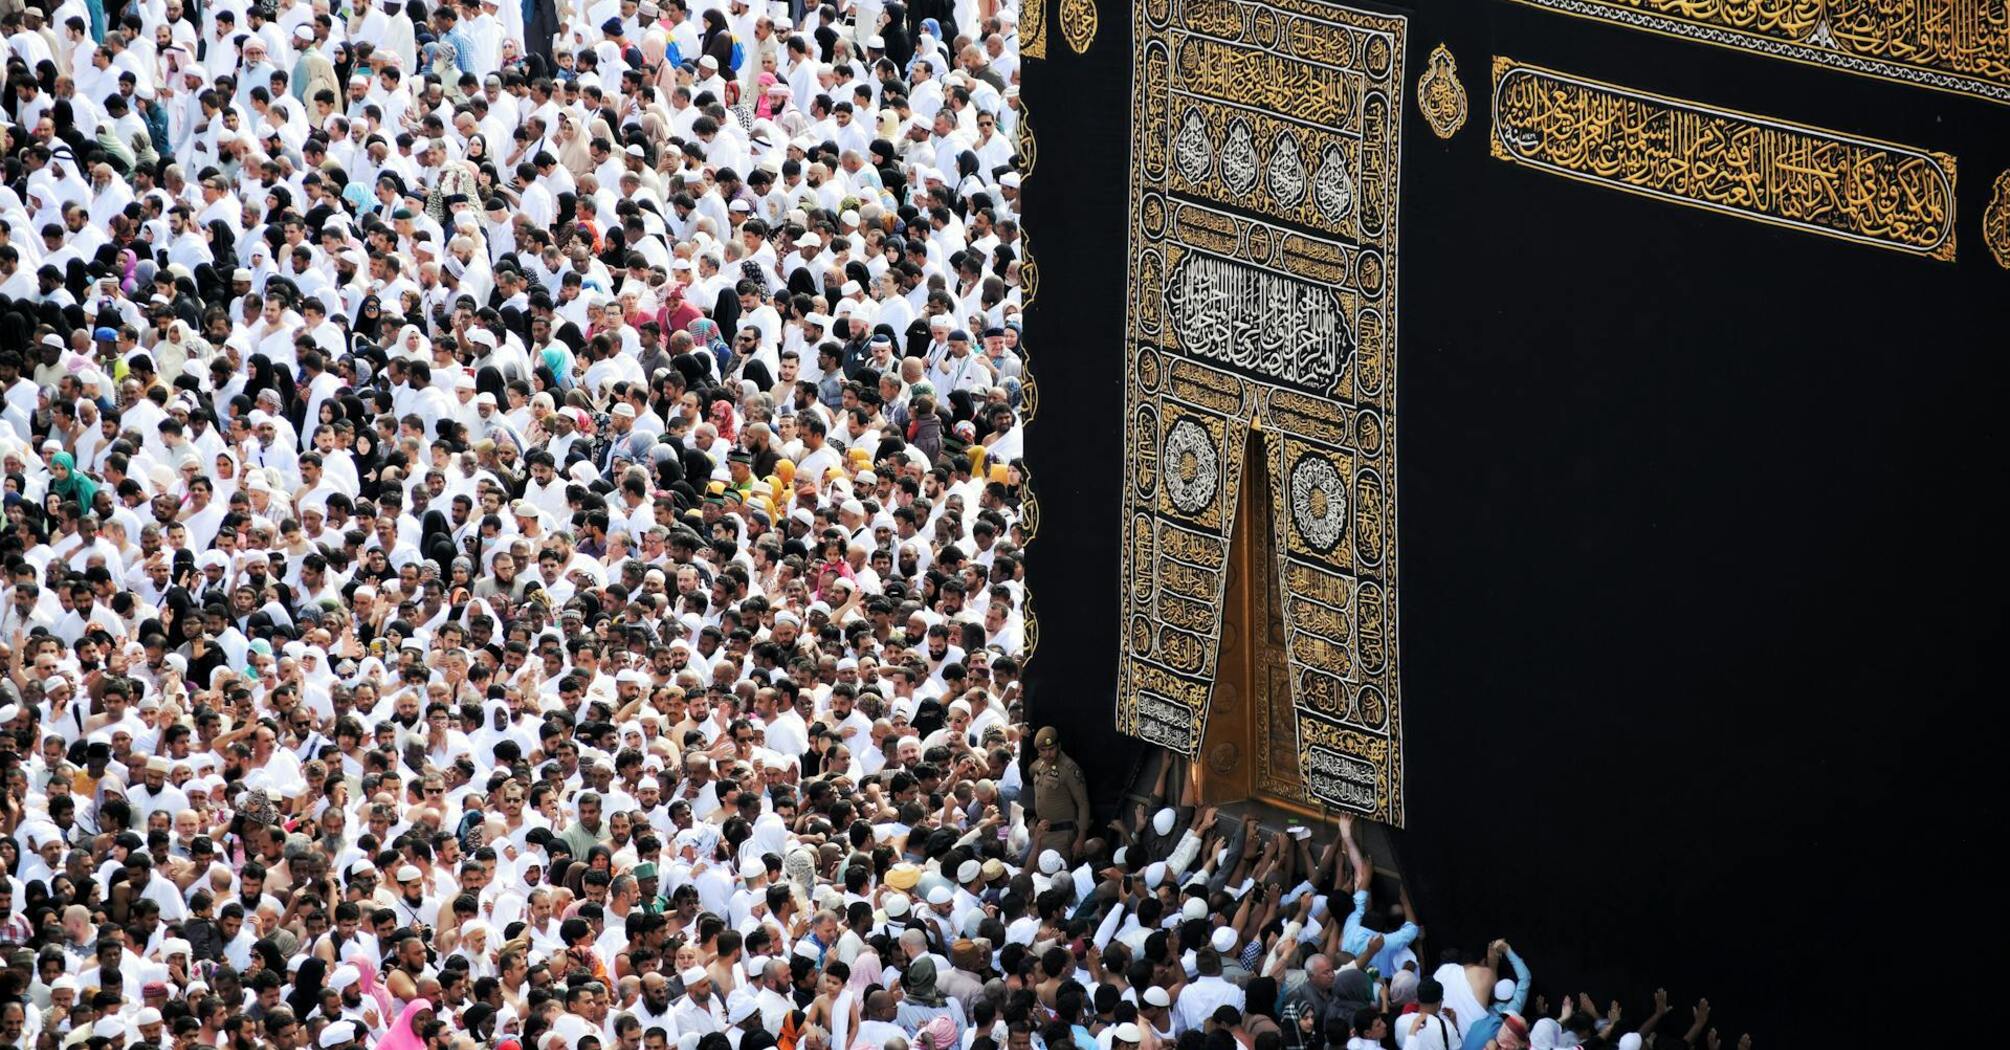 A large crowd of people dressed in white Ihram clothing performing the Islamic pilgrimage, Hajj, around the Kaaba in Mecca